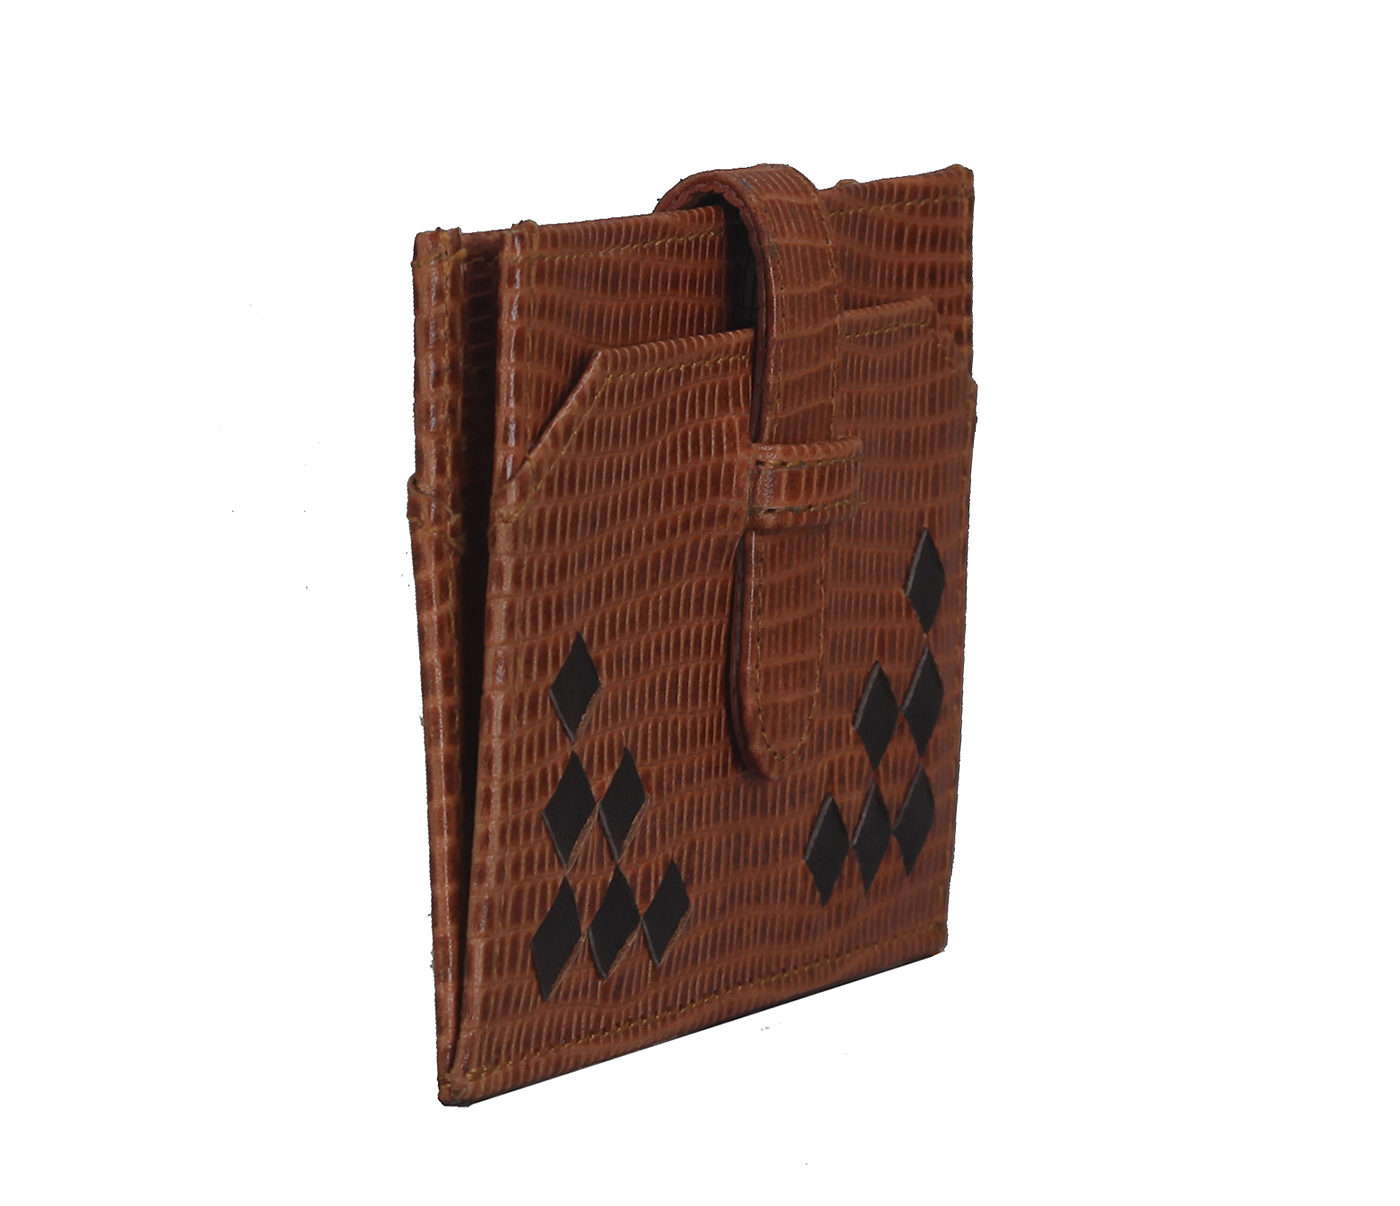 W272--Credit Card cum business card holder in Genuine leather - Tan/Brown